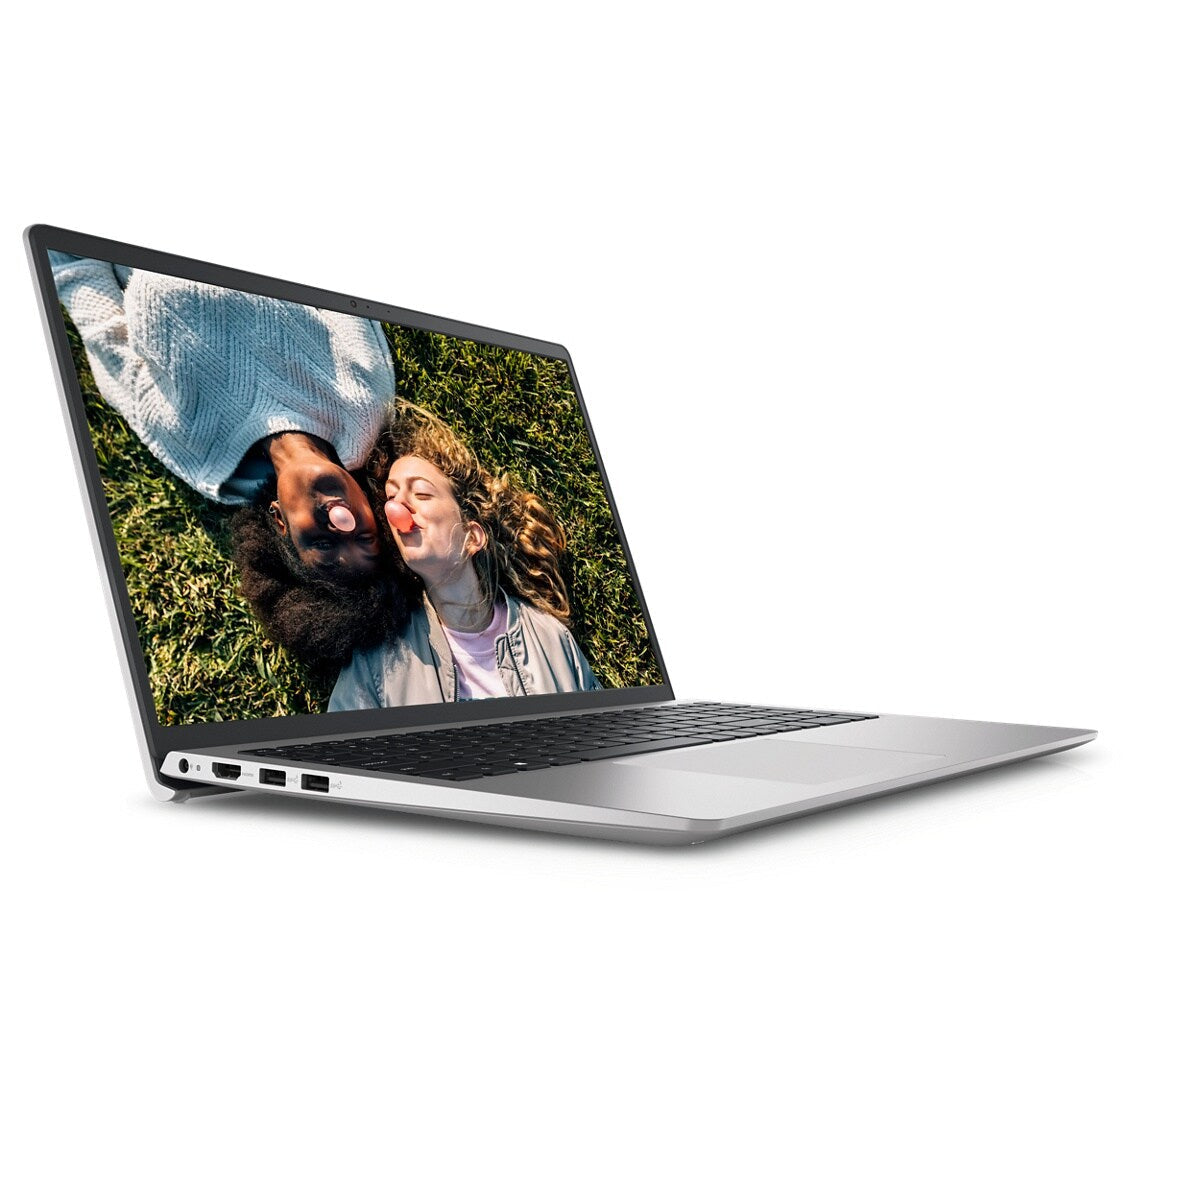 kandidaat Droogte Uiterlijk Dell Inspiron 3511 15.6FHD Intel Core i5-1135G7 8GB RAM 1TB HDD NVIDIA –  ELN Online Store Philippines